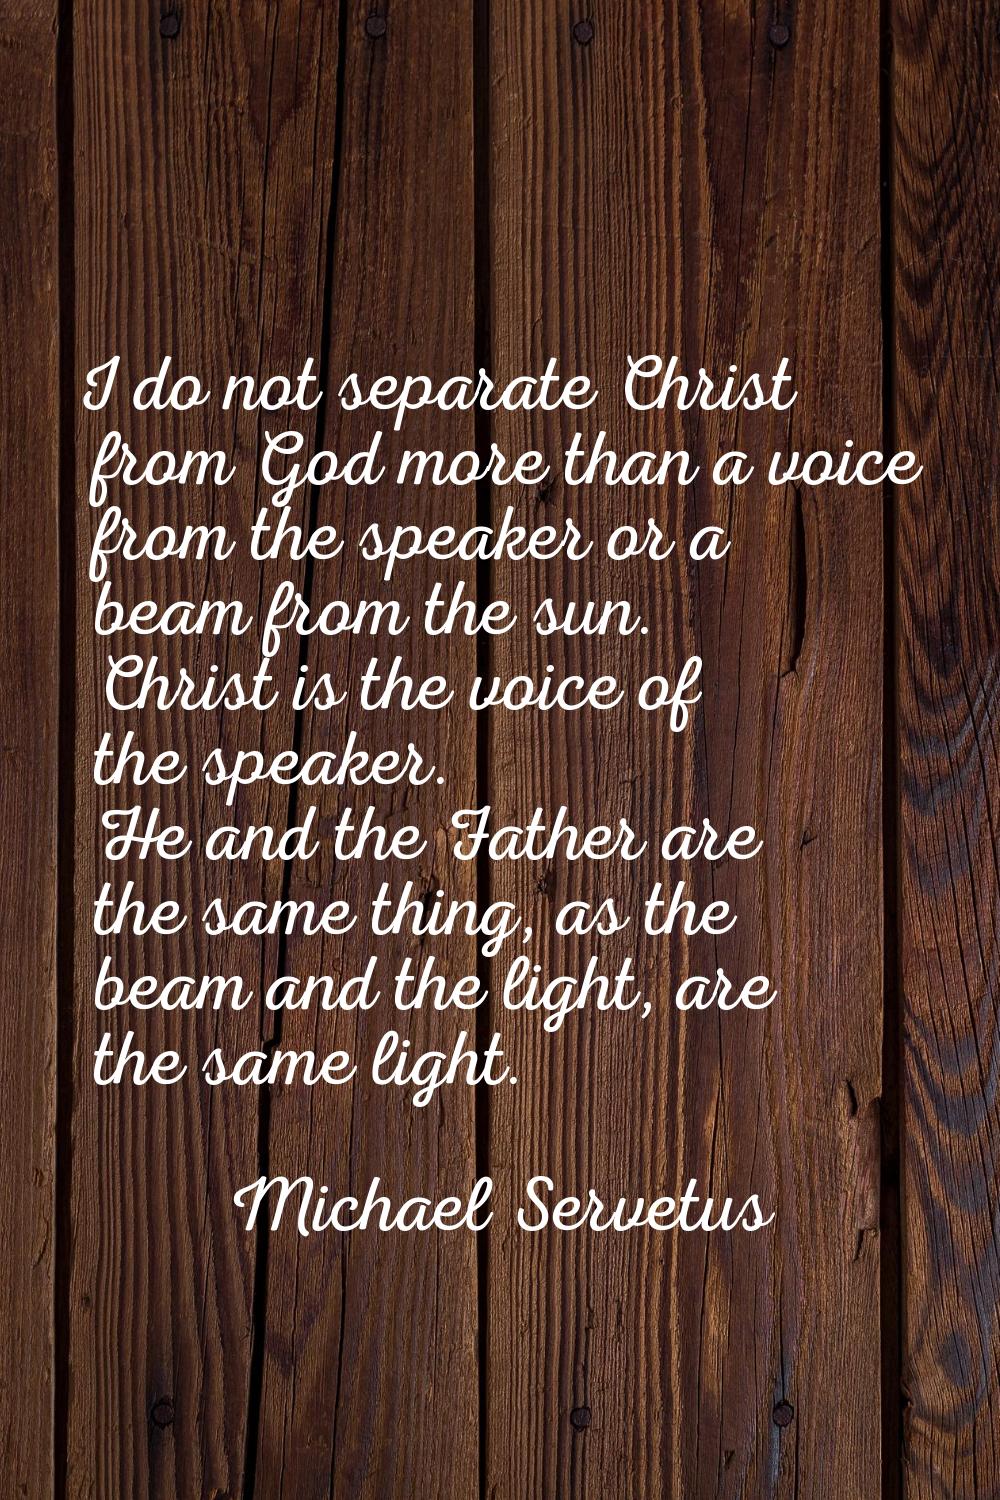 I do not separate Christ from God more than a voice from the speaker or a beam from the sun. Christ